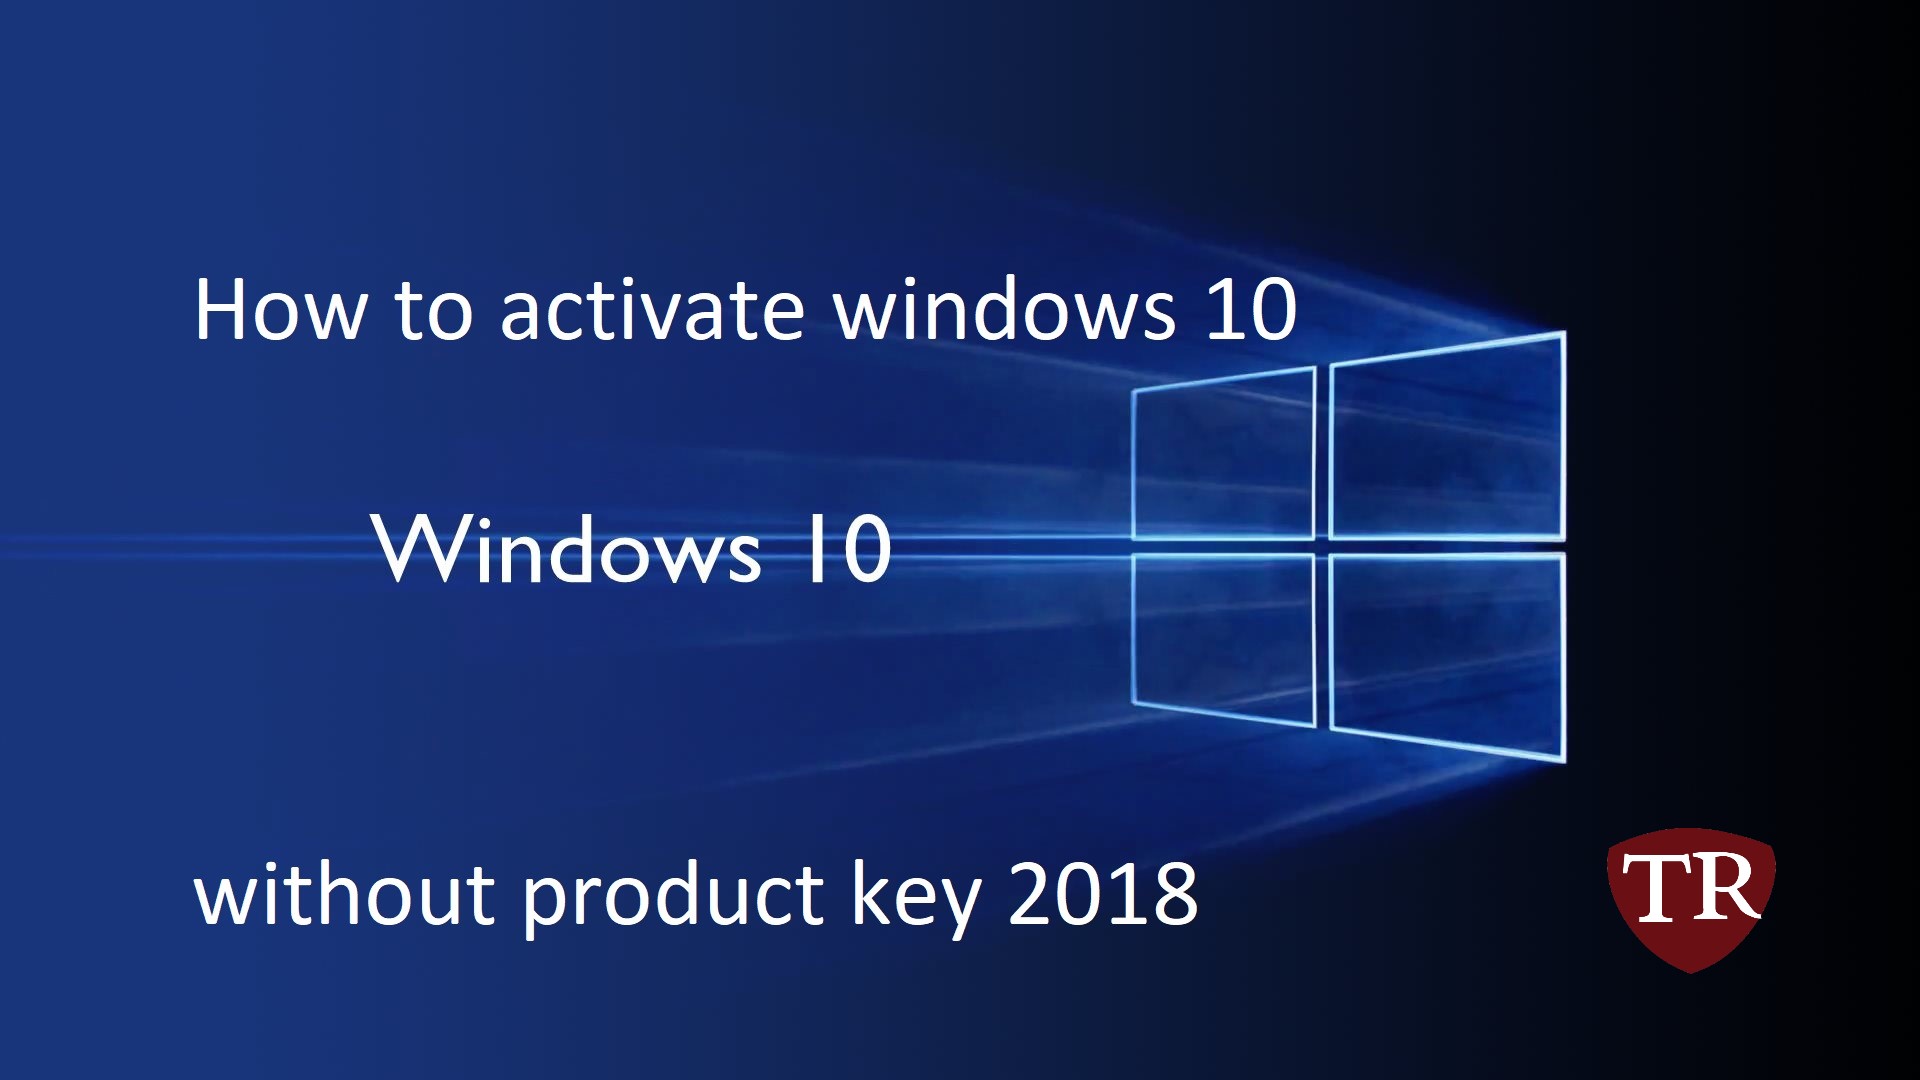 How to activate windows 10 without product key 2018